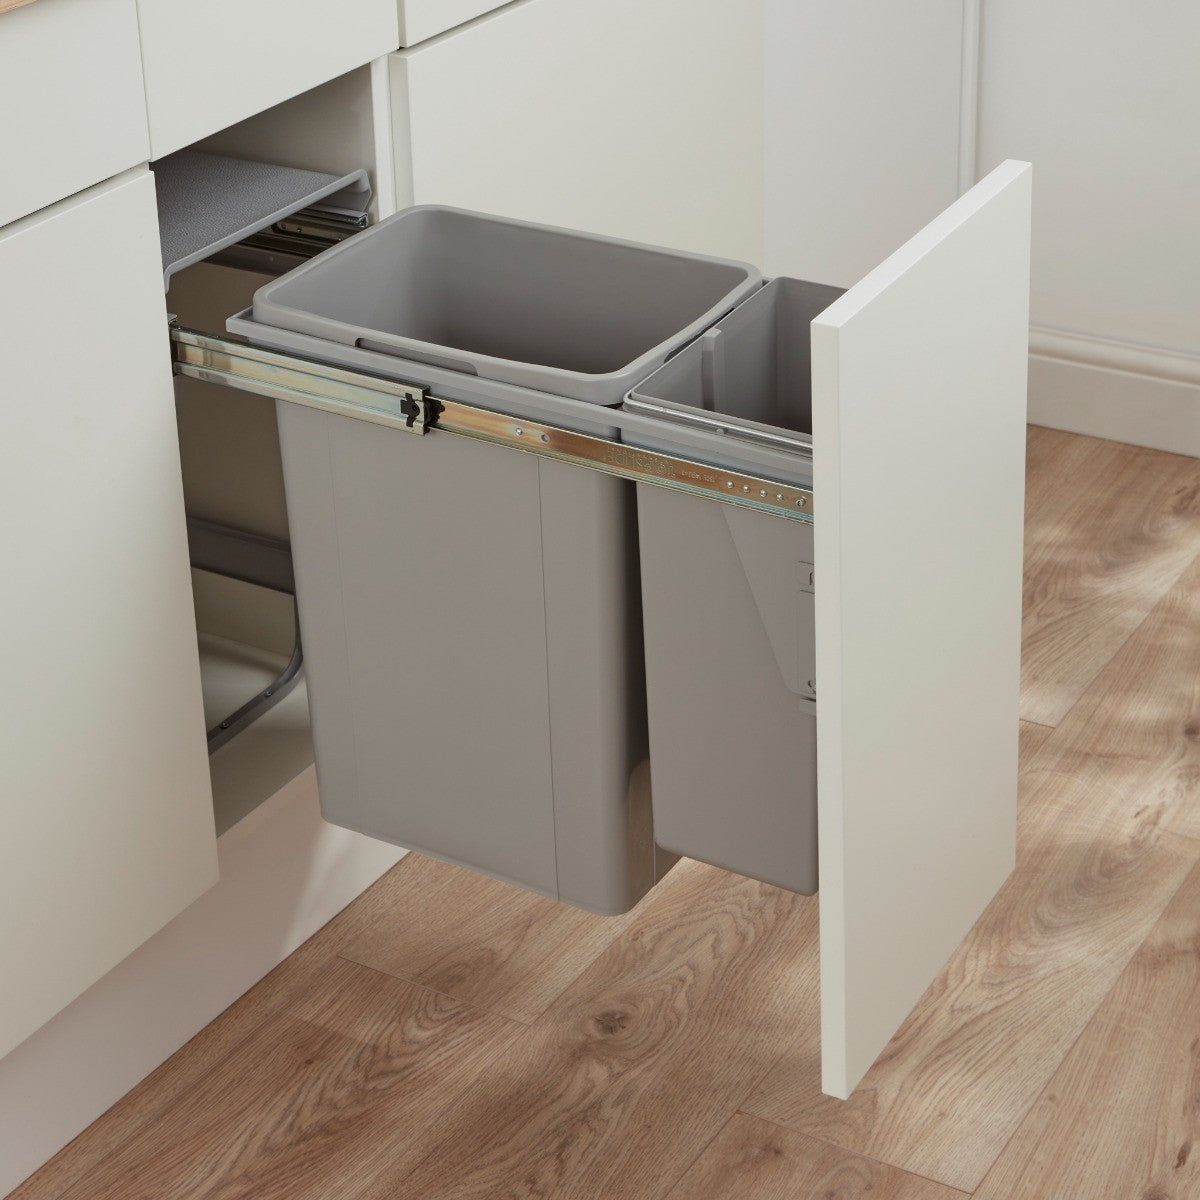 Wesco Bio Double 2 compartment 36 Litre in-cupboard kitchen recycling bin for 300mm wide pull-out door cabinet 785WS801-85